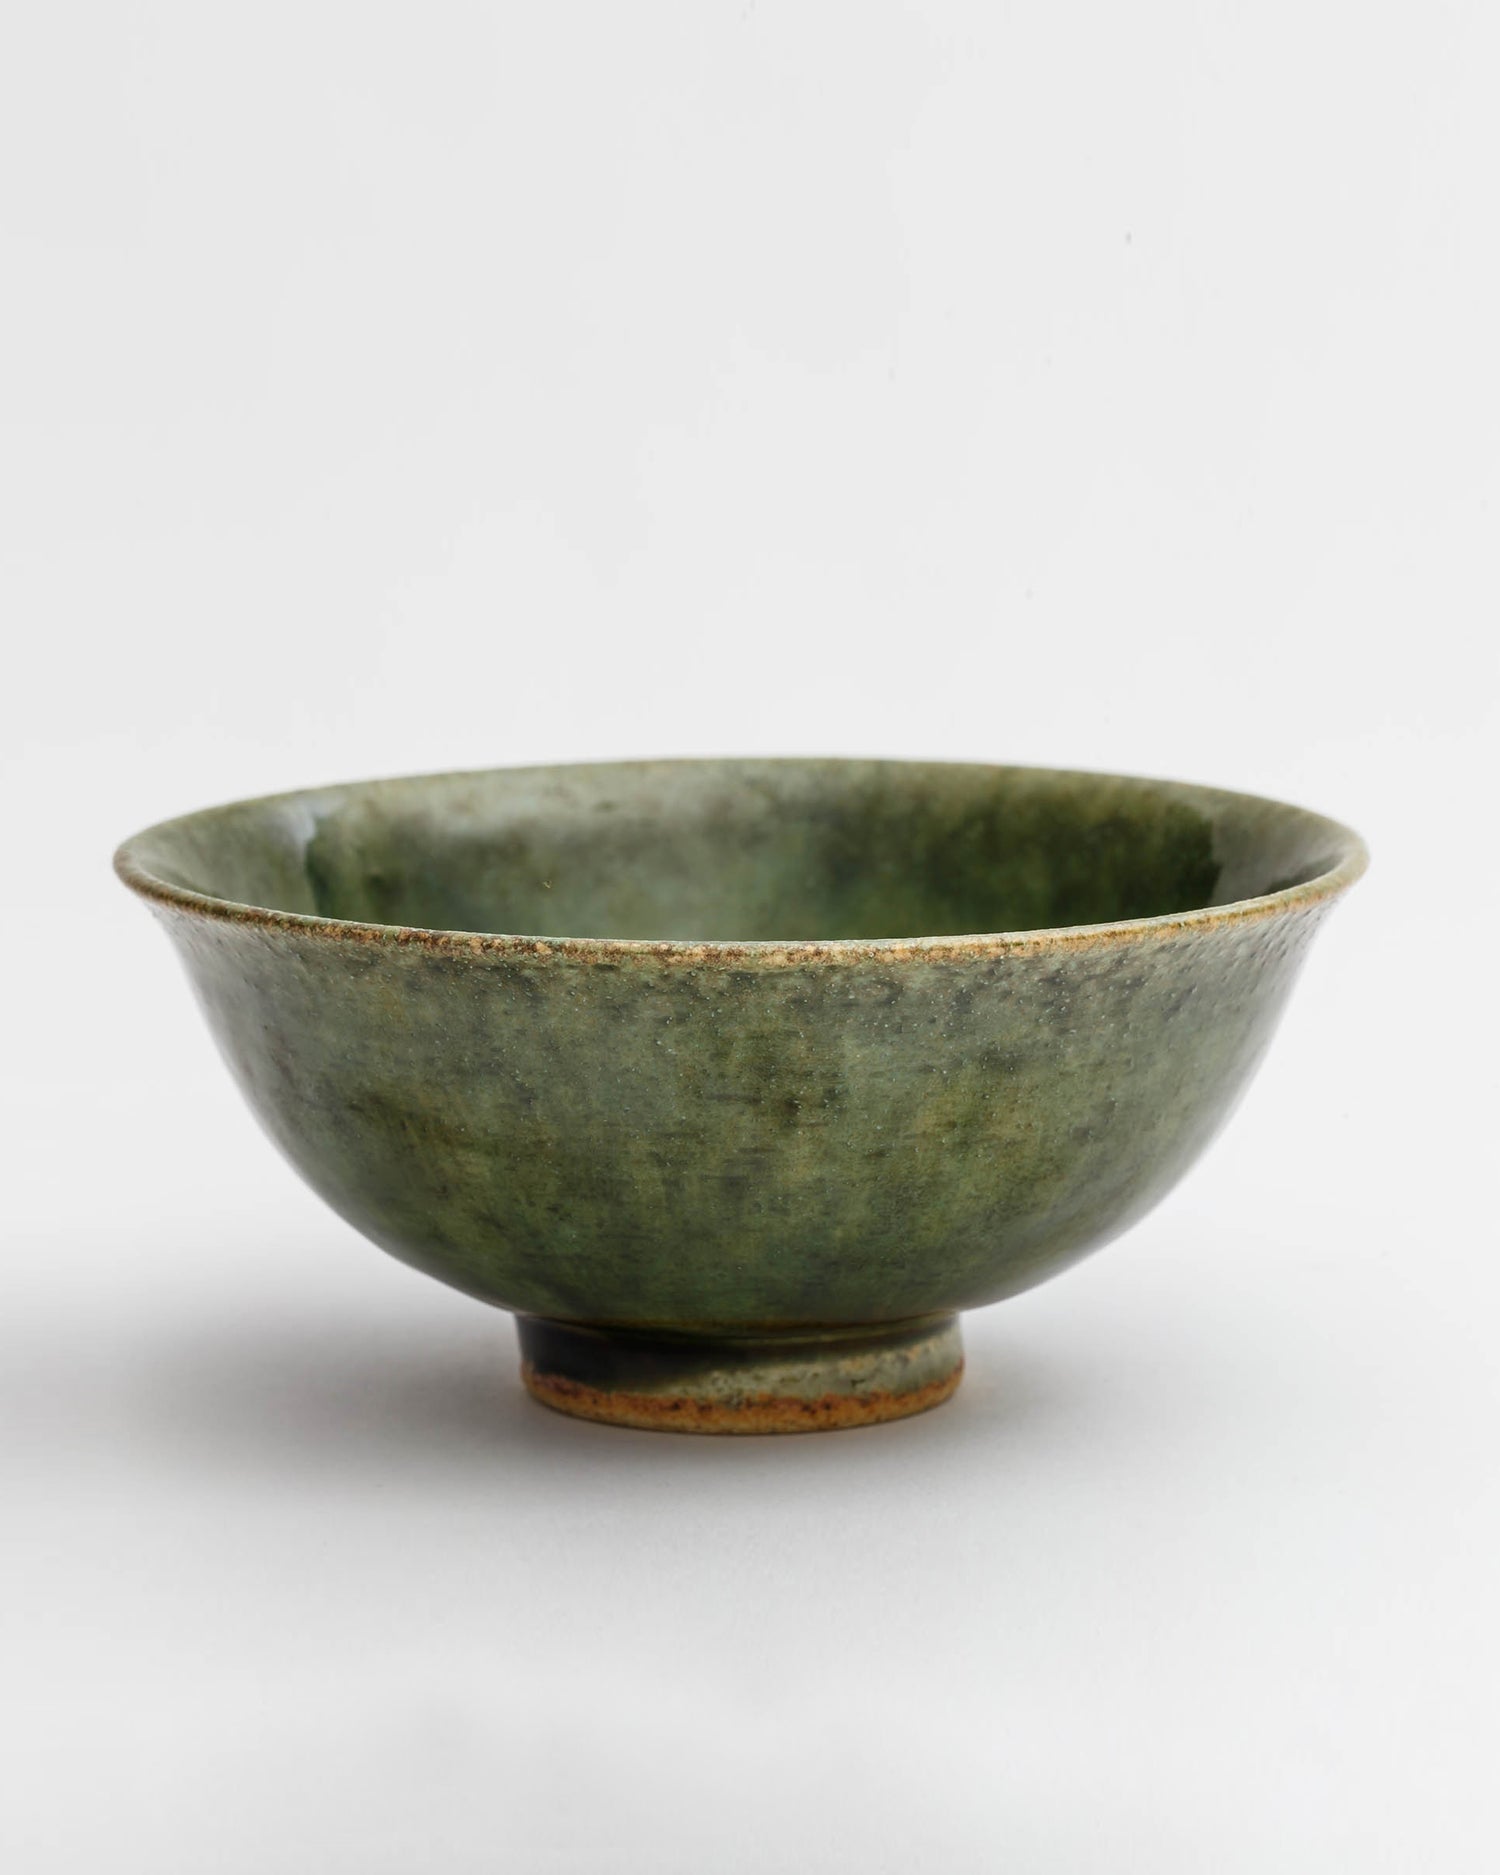 Silhouetted image of ceramic oribe rice bowl with deep green glaze by Time and Style against white-gray background. 